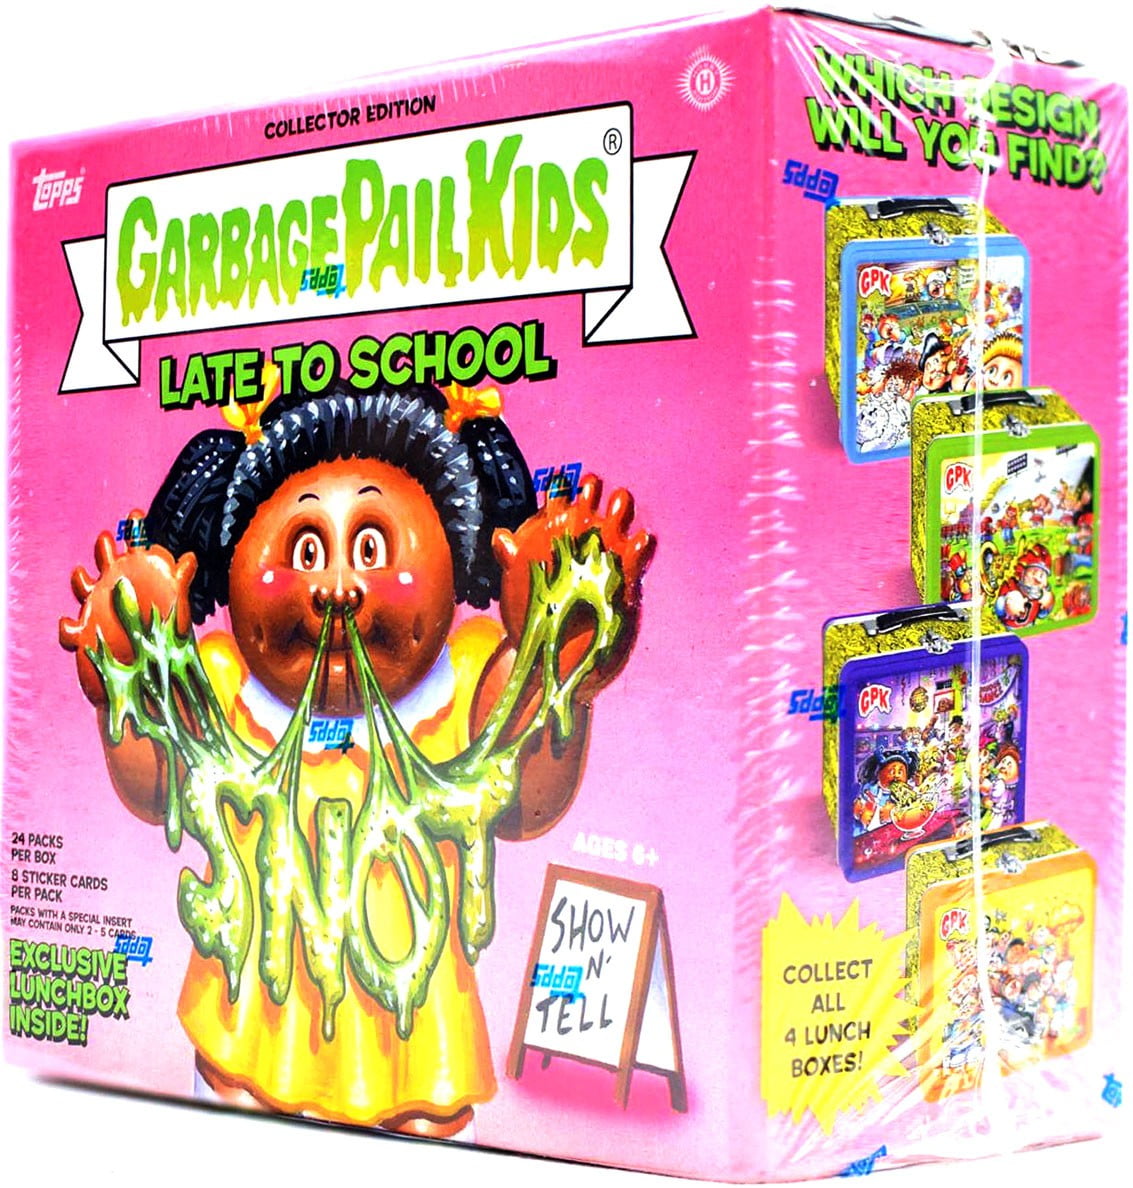 12 PACK LOT 2020 TOPPS GARBAGE PAIL KIDS CHROME SERIES 3 FAT PACKS LIVE 